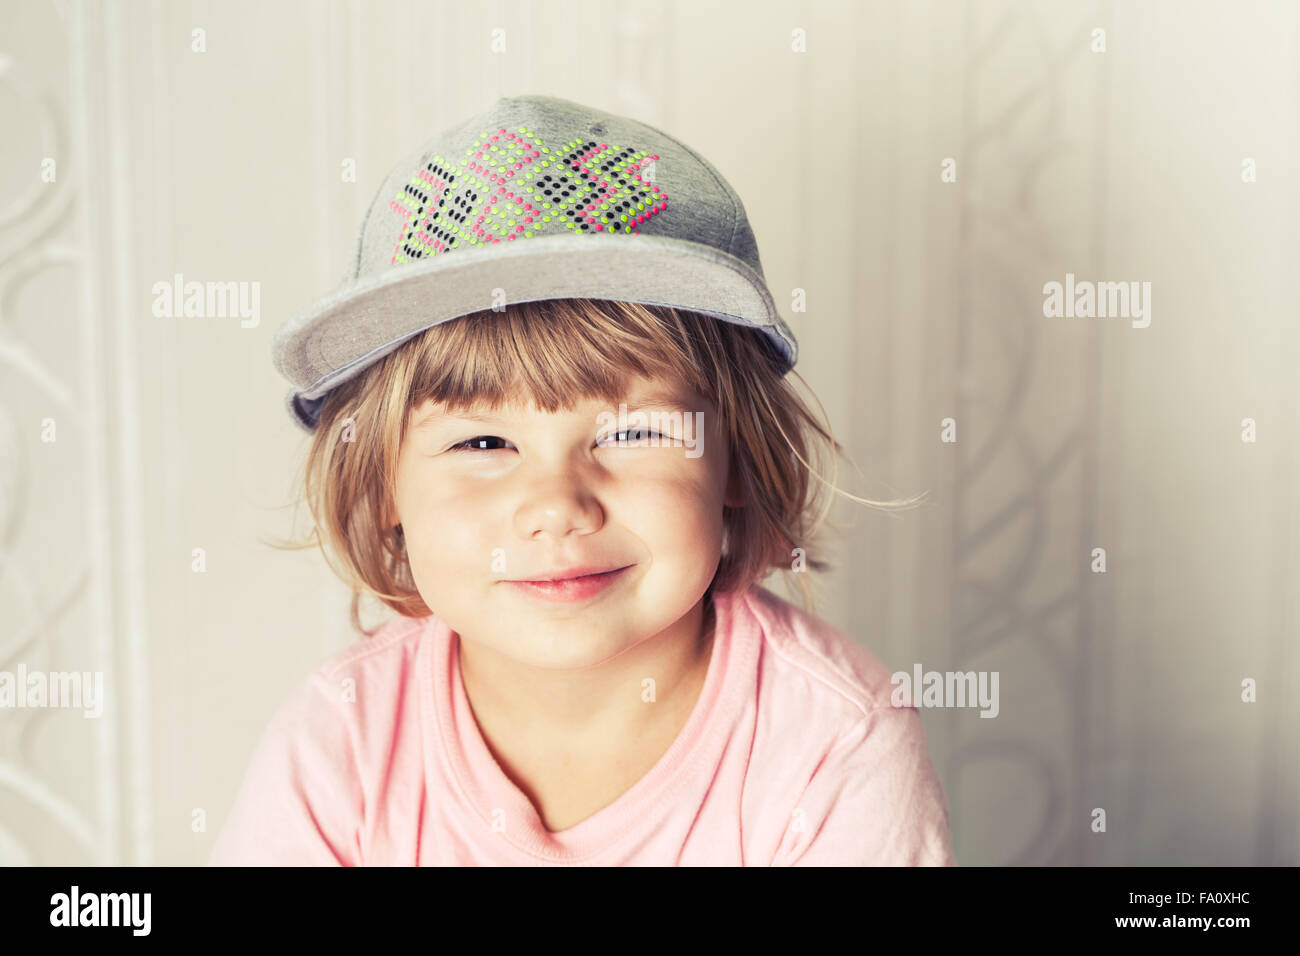 Closeup portrait of smiling cute Caucasian blond baby girl in gray cap, warm vintage tonal correction photo filter Stock Photo